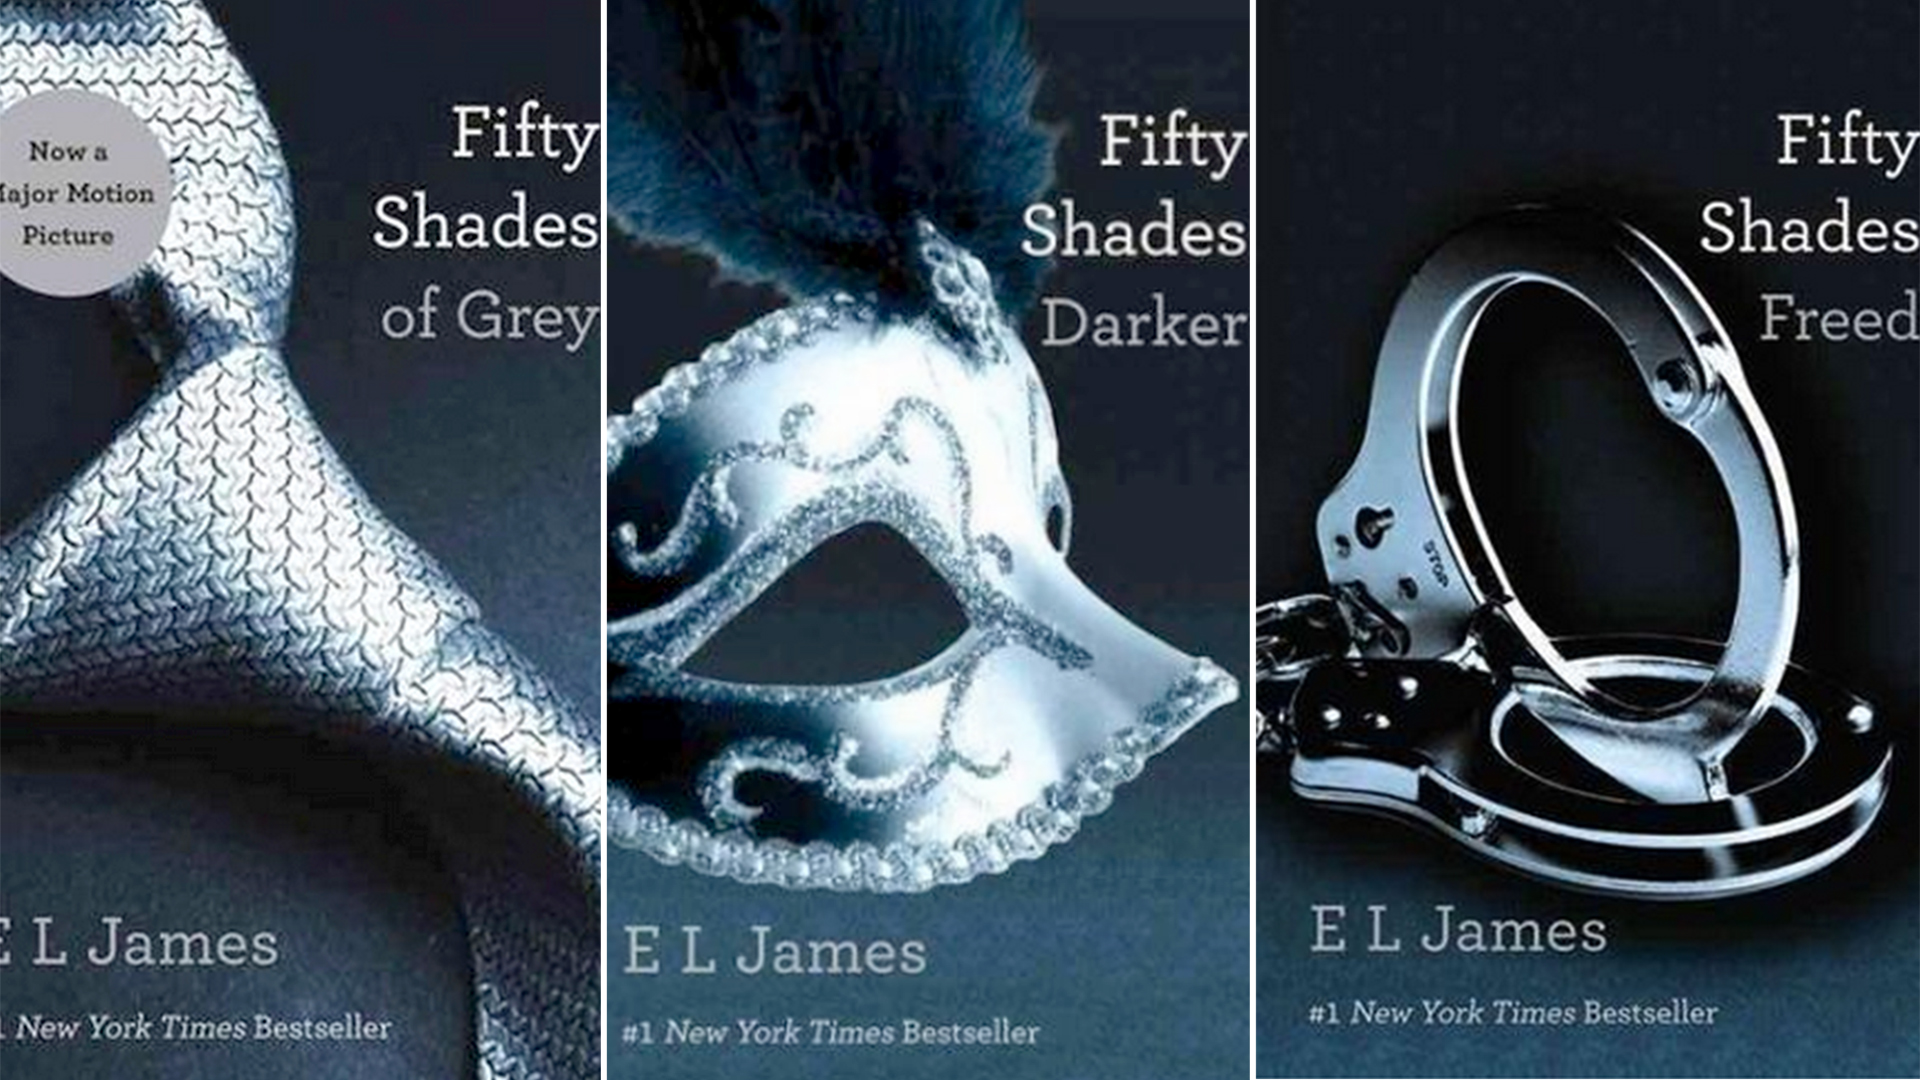 Christian Grey is back in 'Fifty Shades' book 'Grey' - TODAY.com